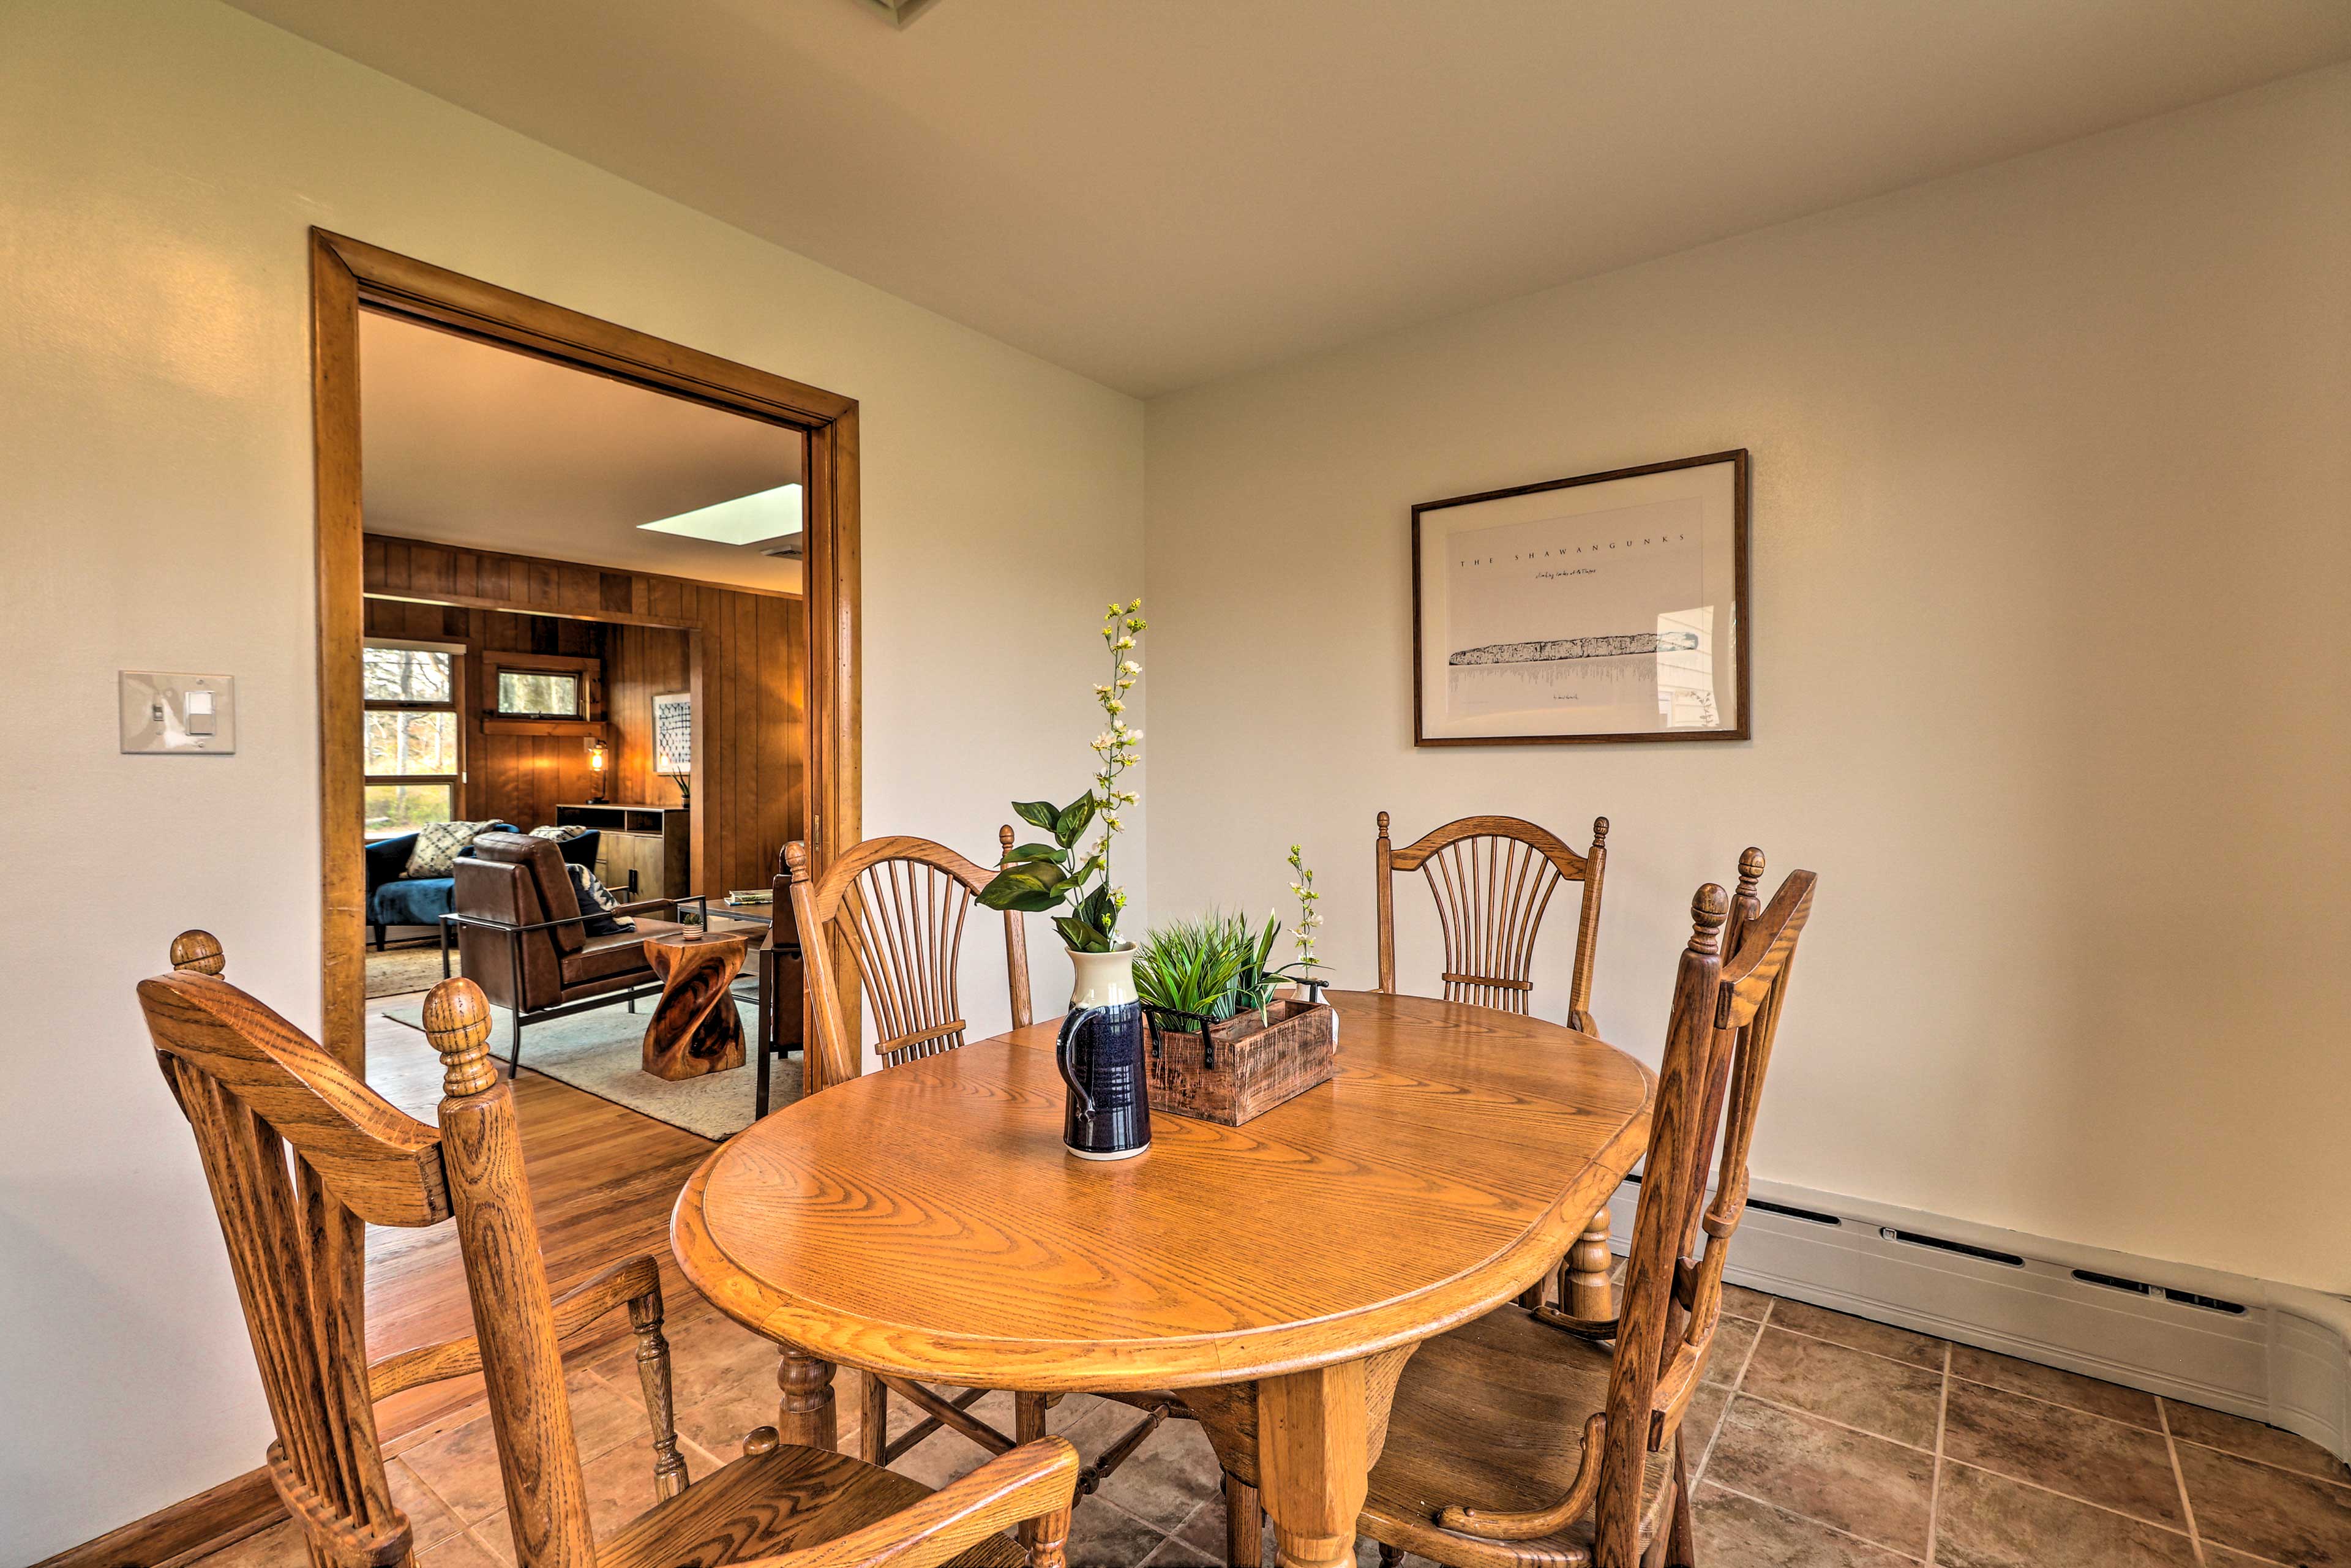 Dine at the wooden table in this cozy nook.